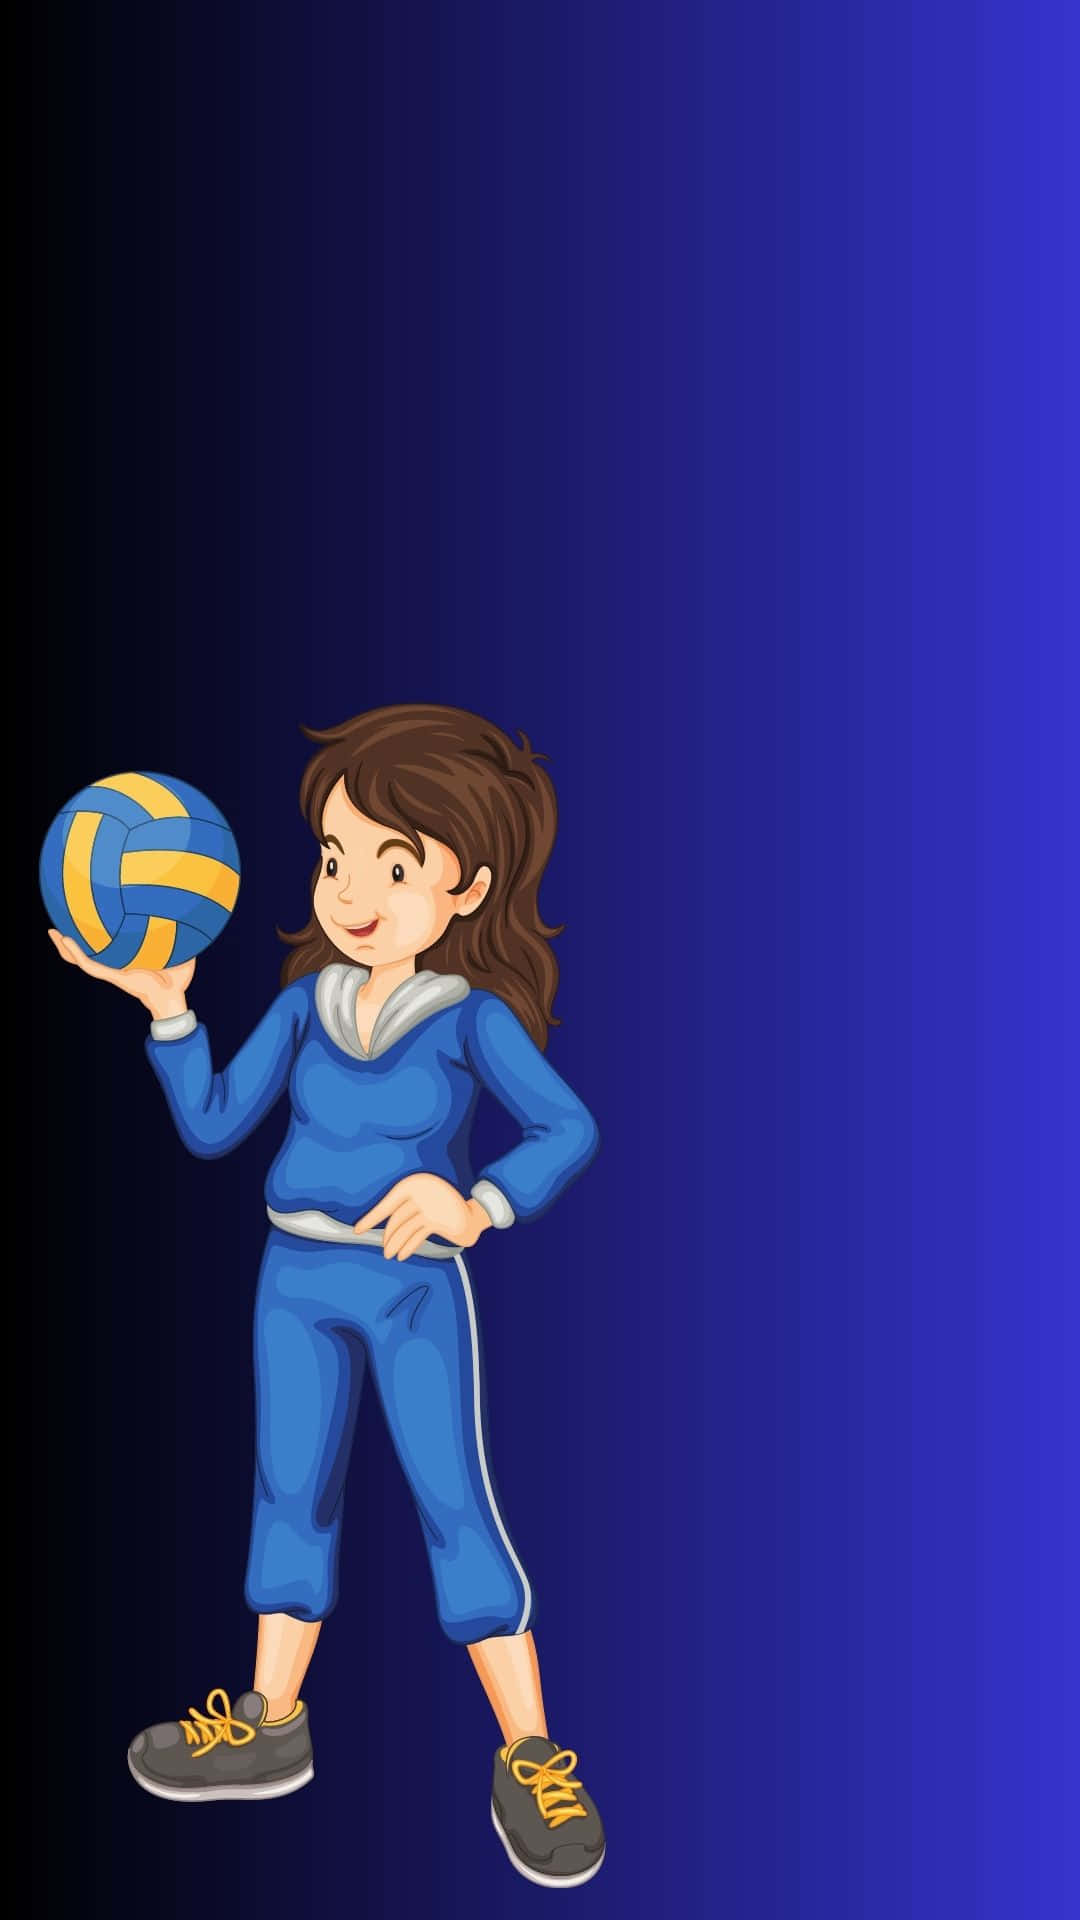 Lady In Blue Holding Volleyball Sports Background